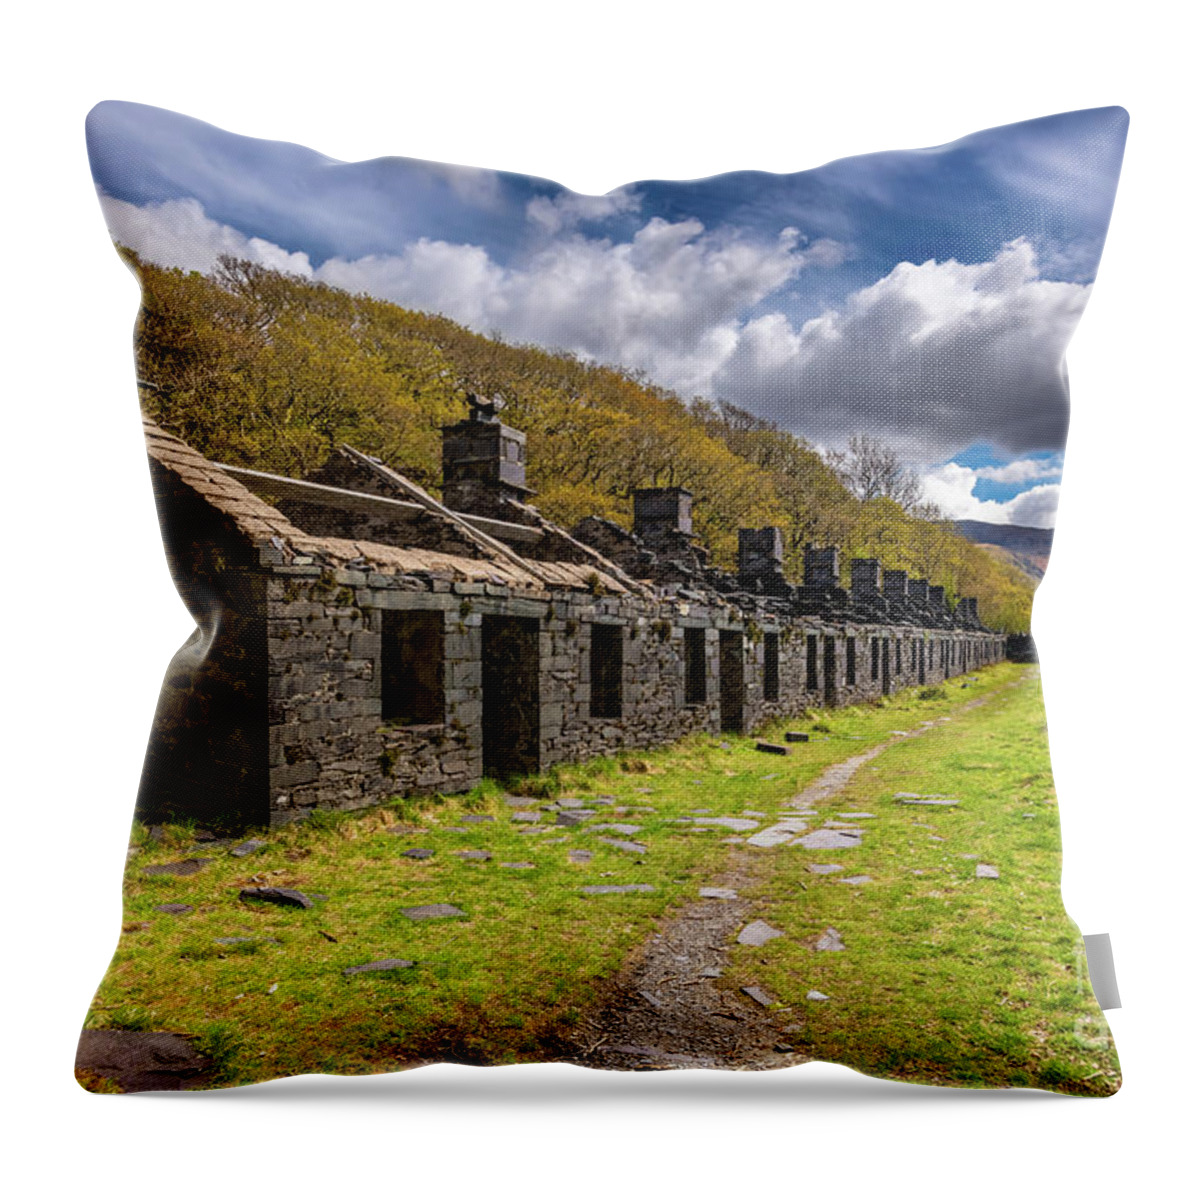 Anglesey Barracks Throw Pillow featuring the photograph Anglesey Barracks Dinorwic Quarry Llanberis #2 by Adrian Evans